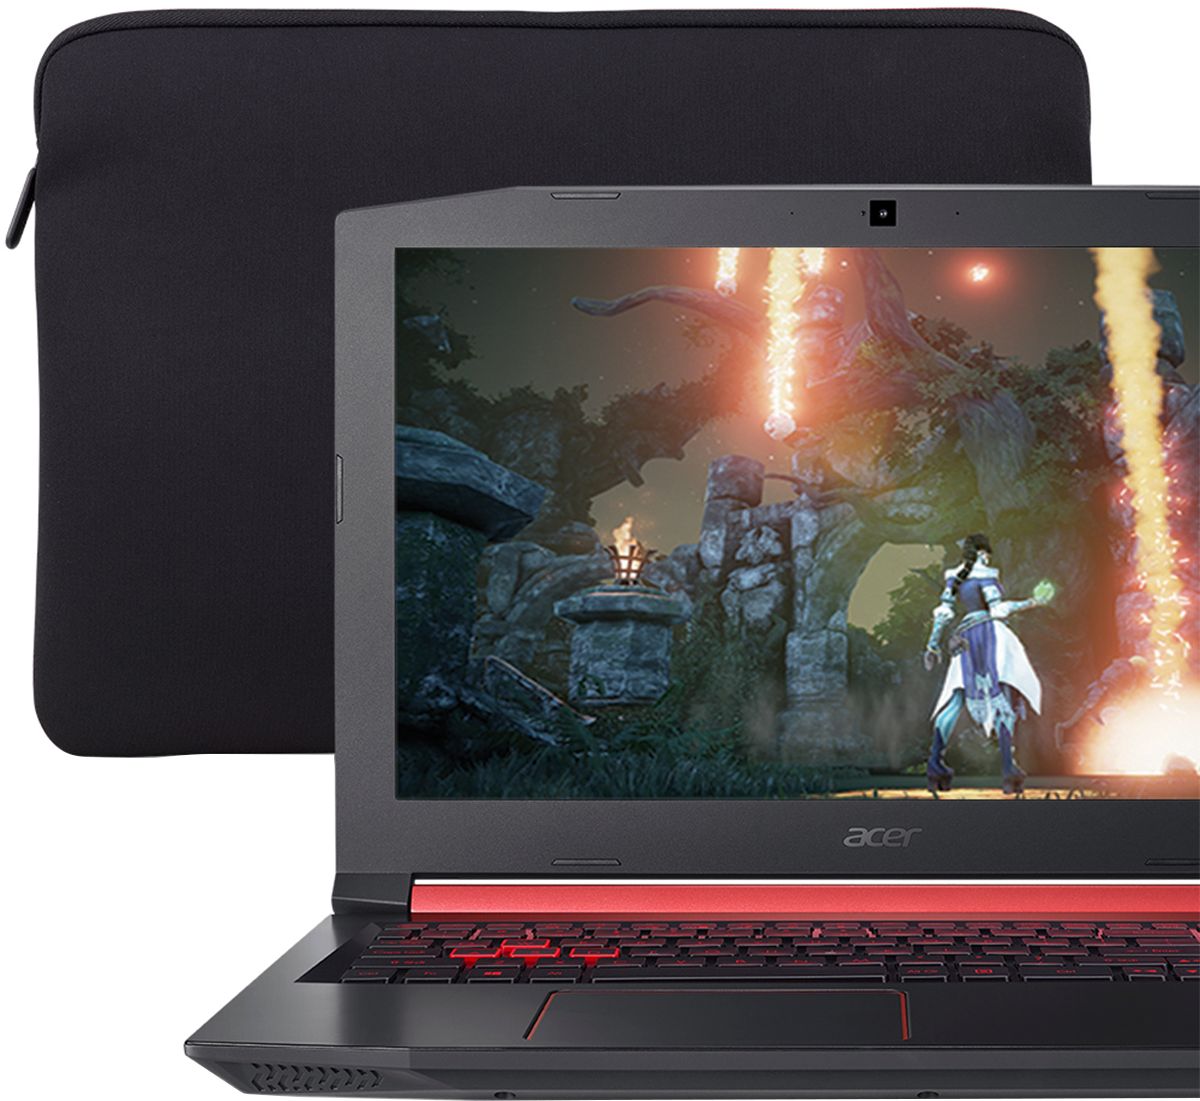 Best Buy Acer Nitro 5 15 6 Gaming Laptop Intel Core I5 8gb Memory Nvidia Geforce Gtx 1050 Ti 256gb Solid State Drive Black An515 53 55g9 - nitro cell roblox id loud